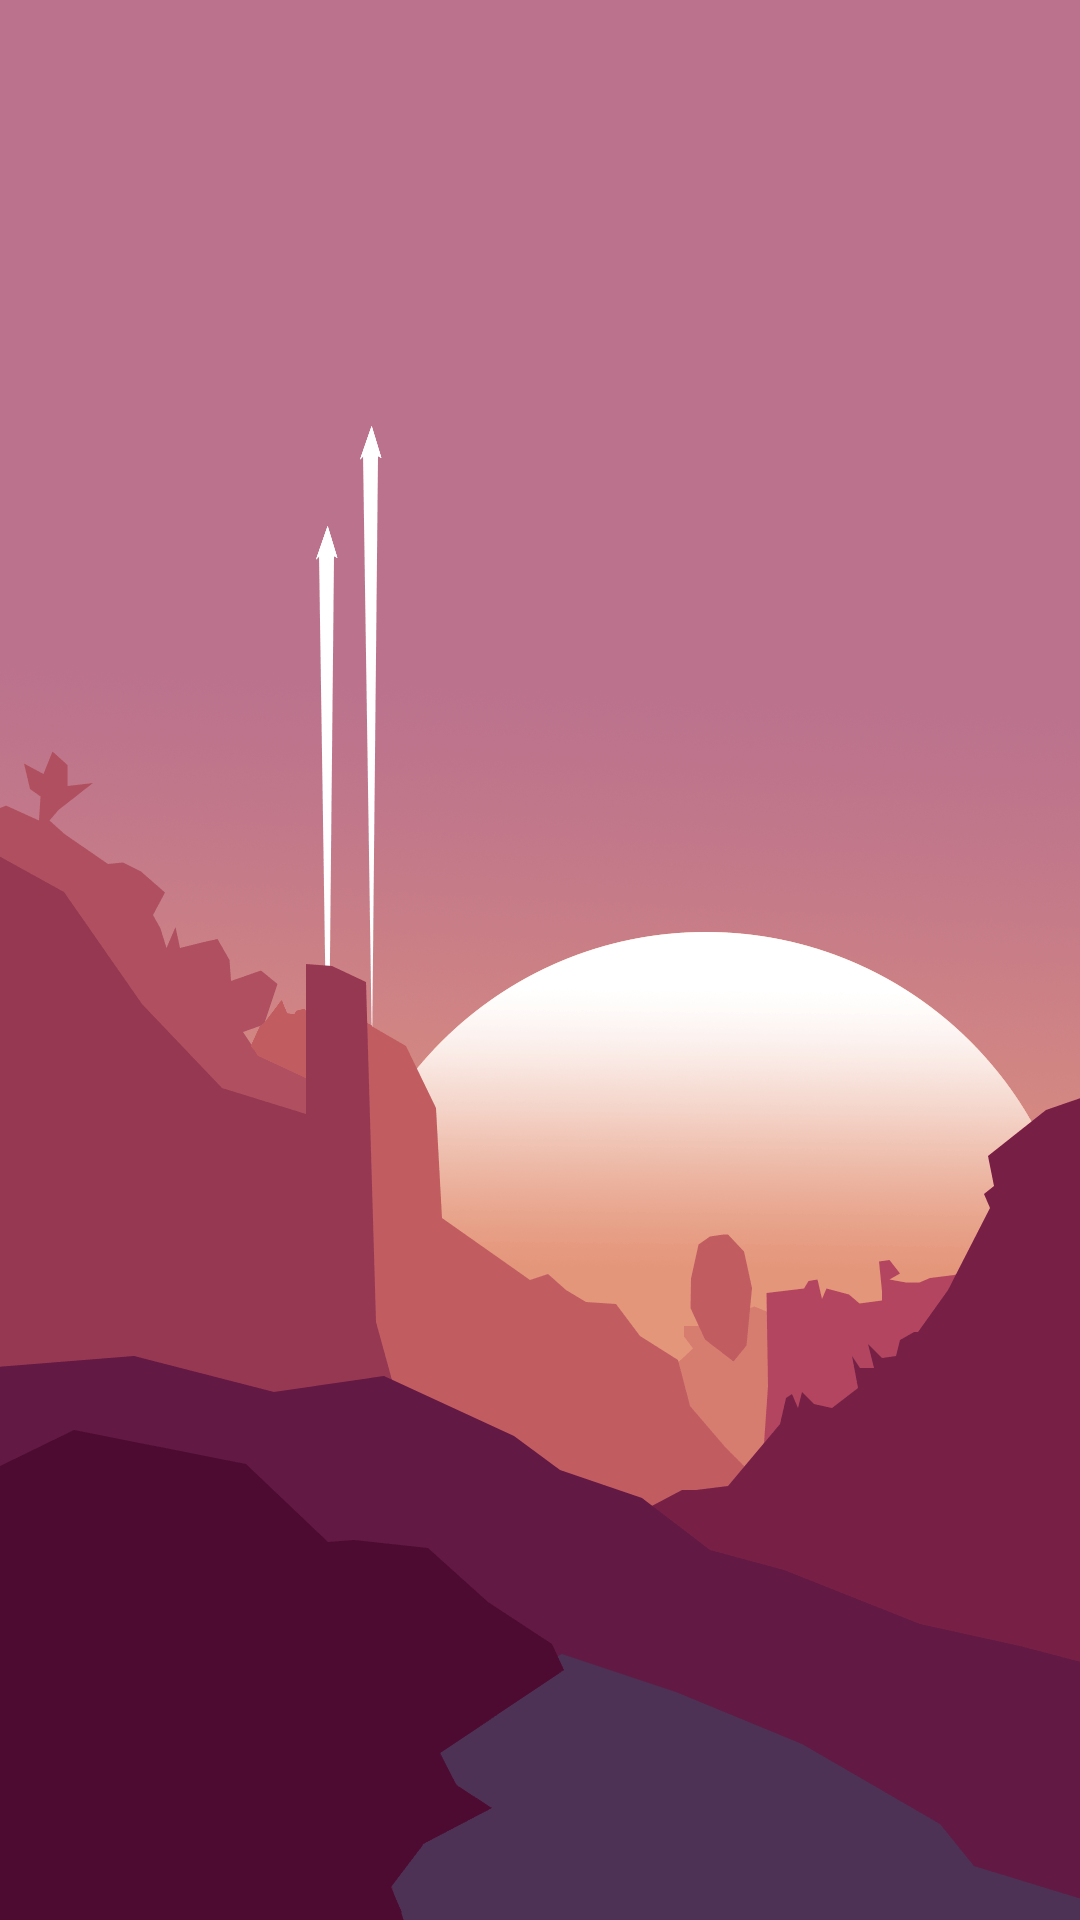 created a minimalist no mans sky phone wallpaper based on a